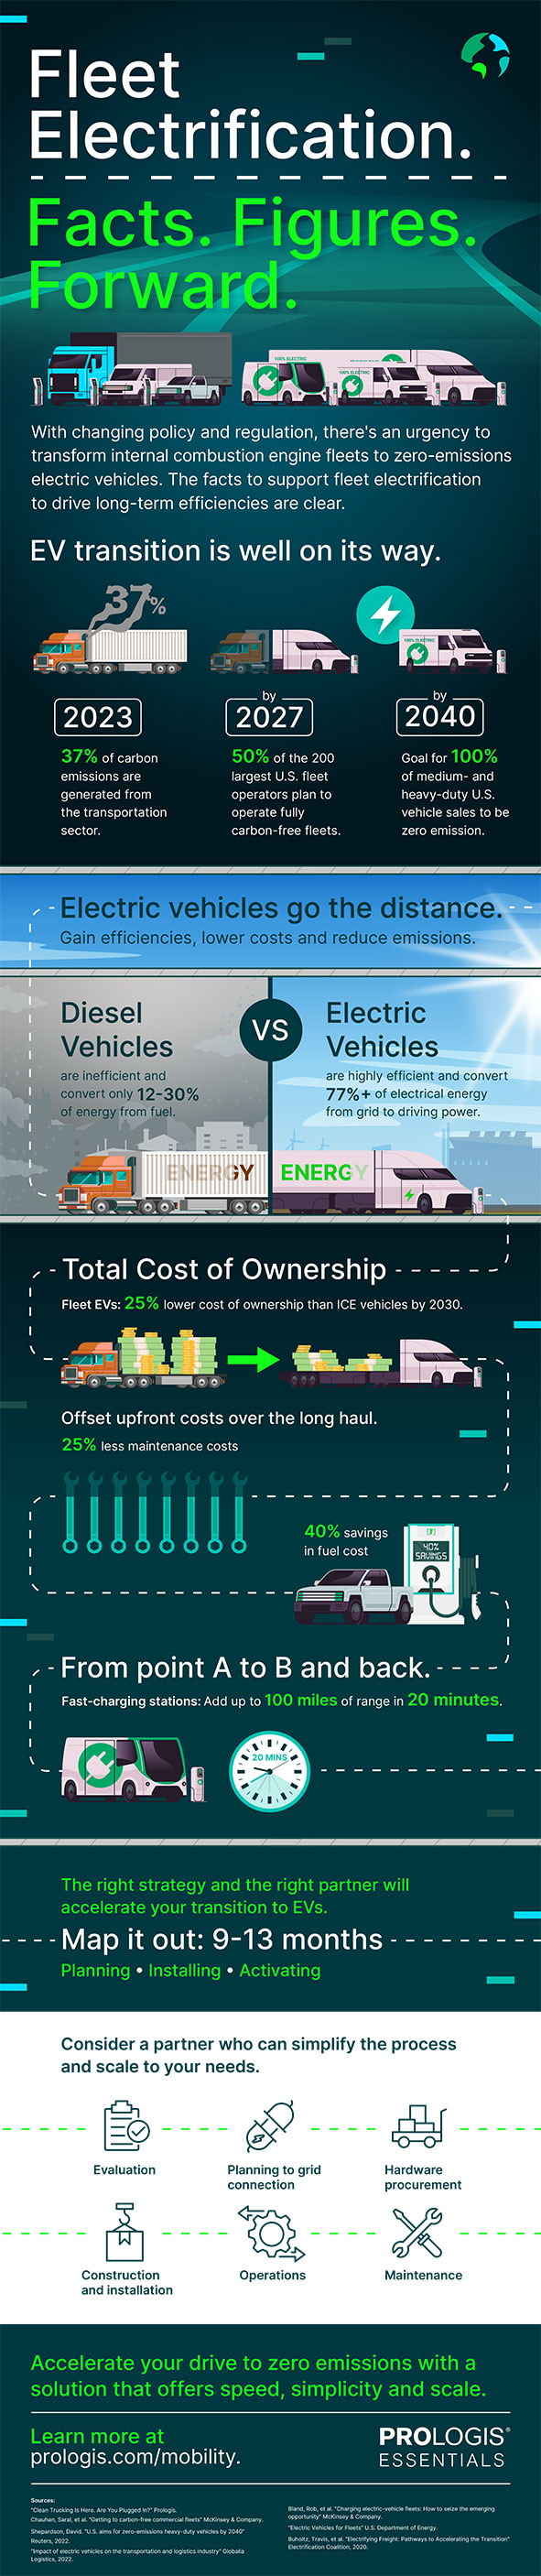 Prologis Mobility infographic